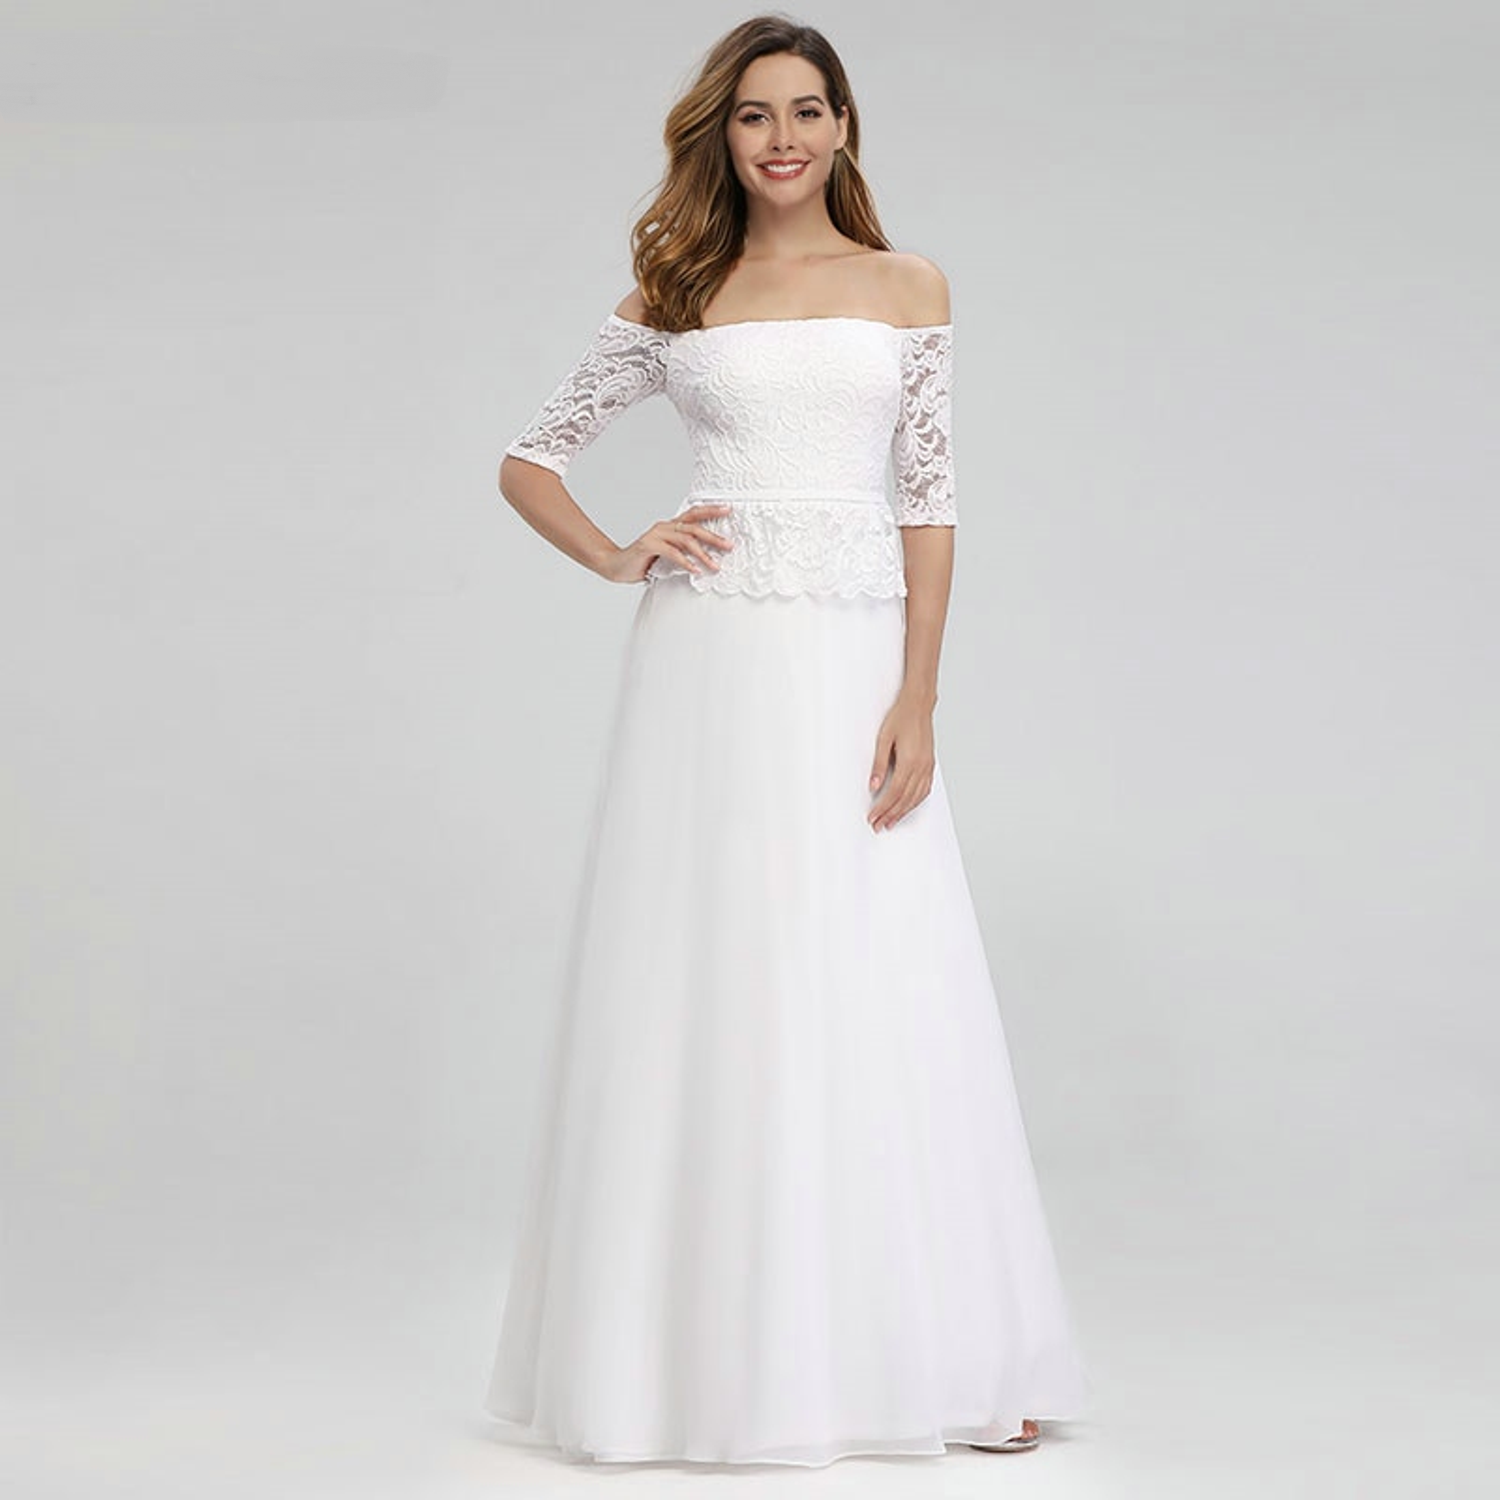 A-line wedding dress with lace sleeves